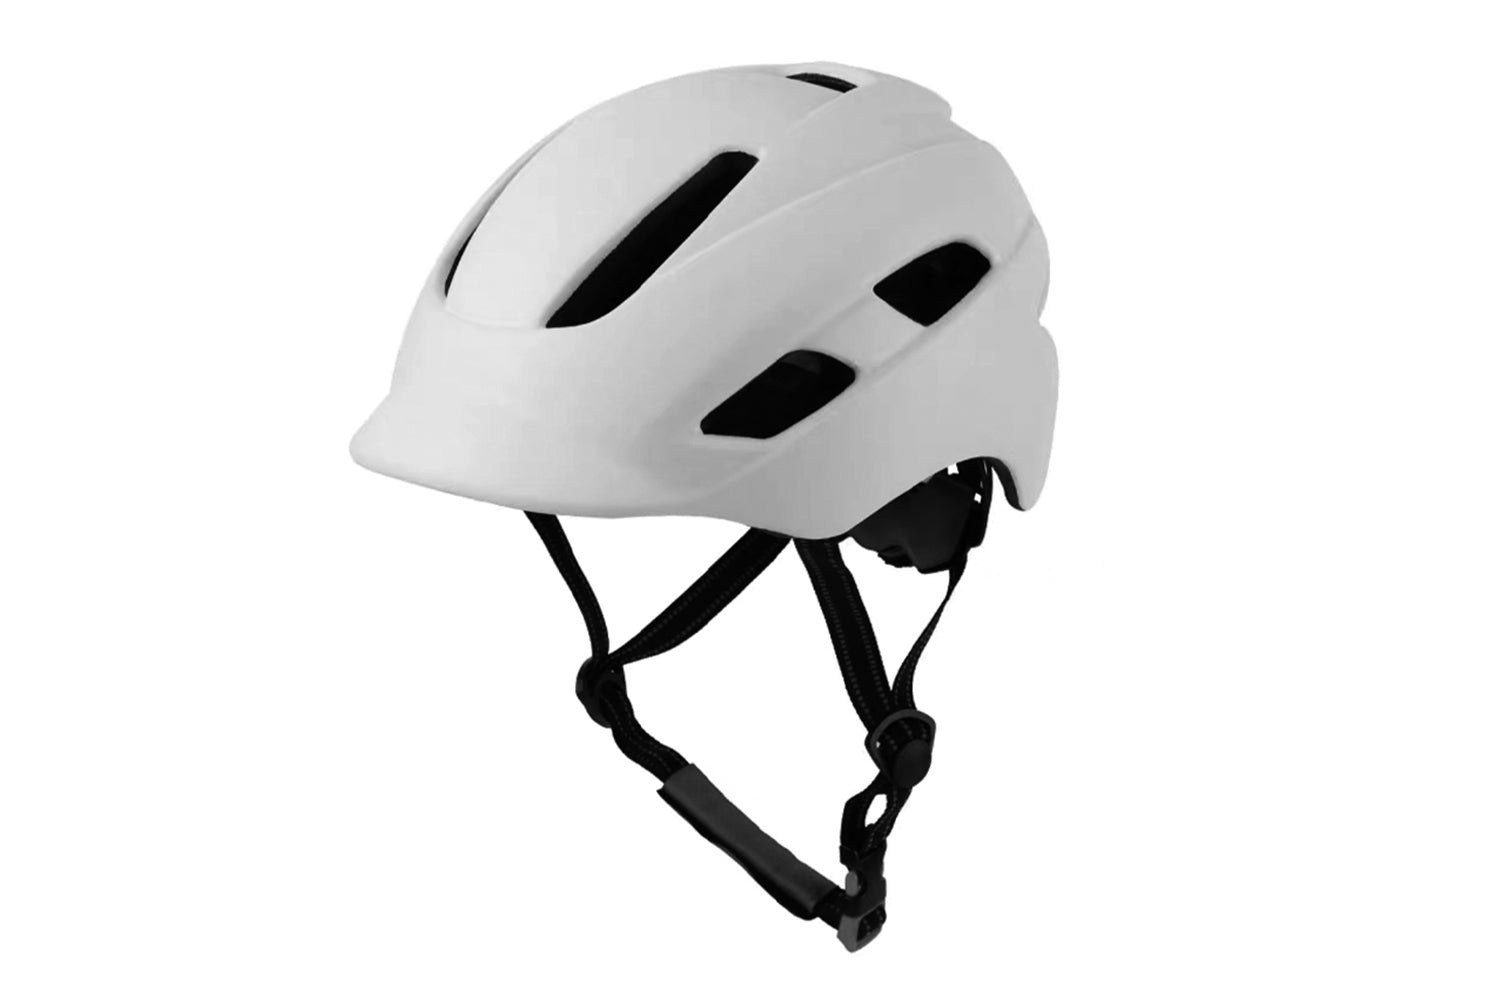 Adjustable Cycling Helmet with LED Safety Light